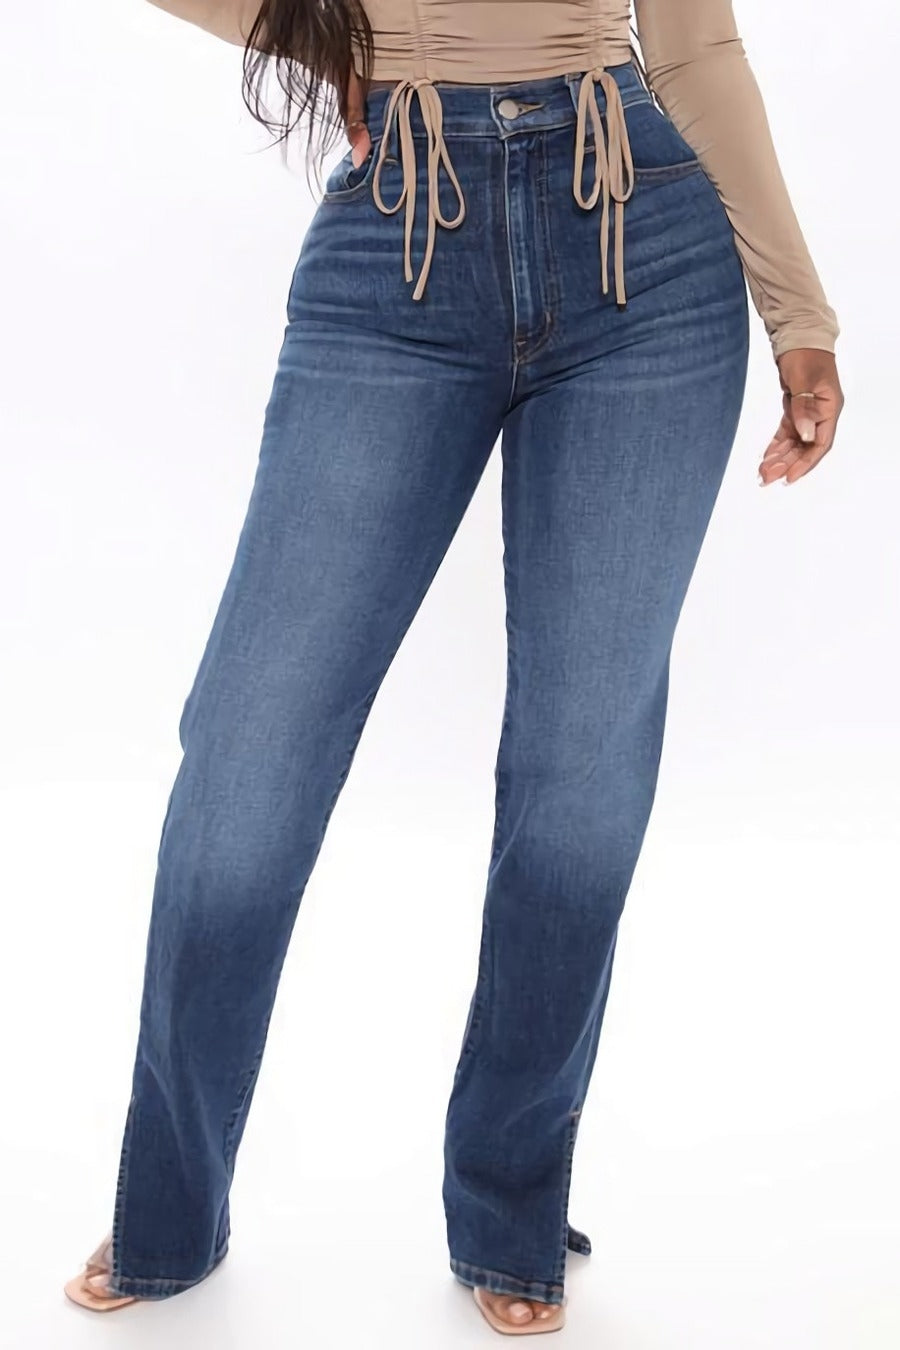 Glamybabes high-waist with pocket slight stretch casual jeans